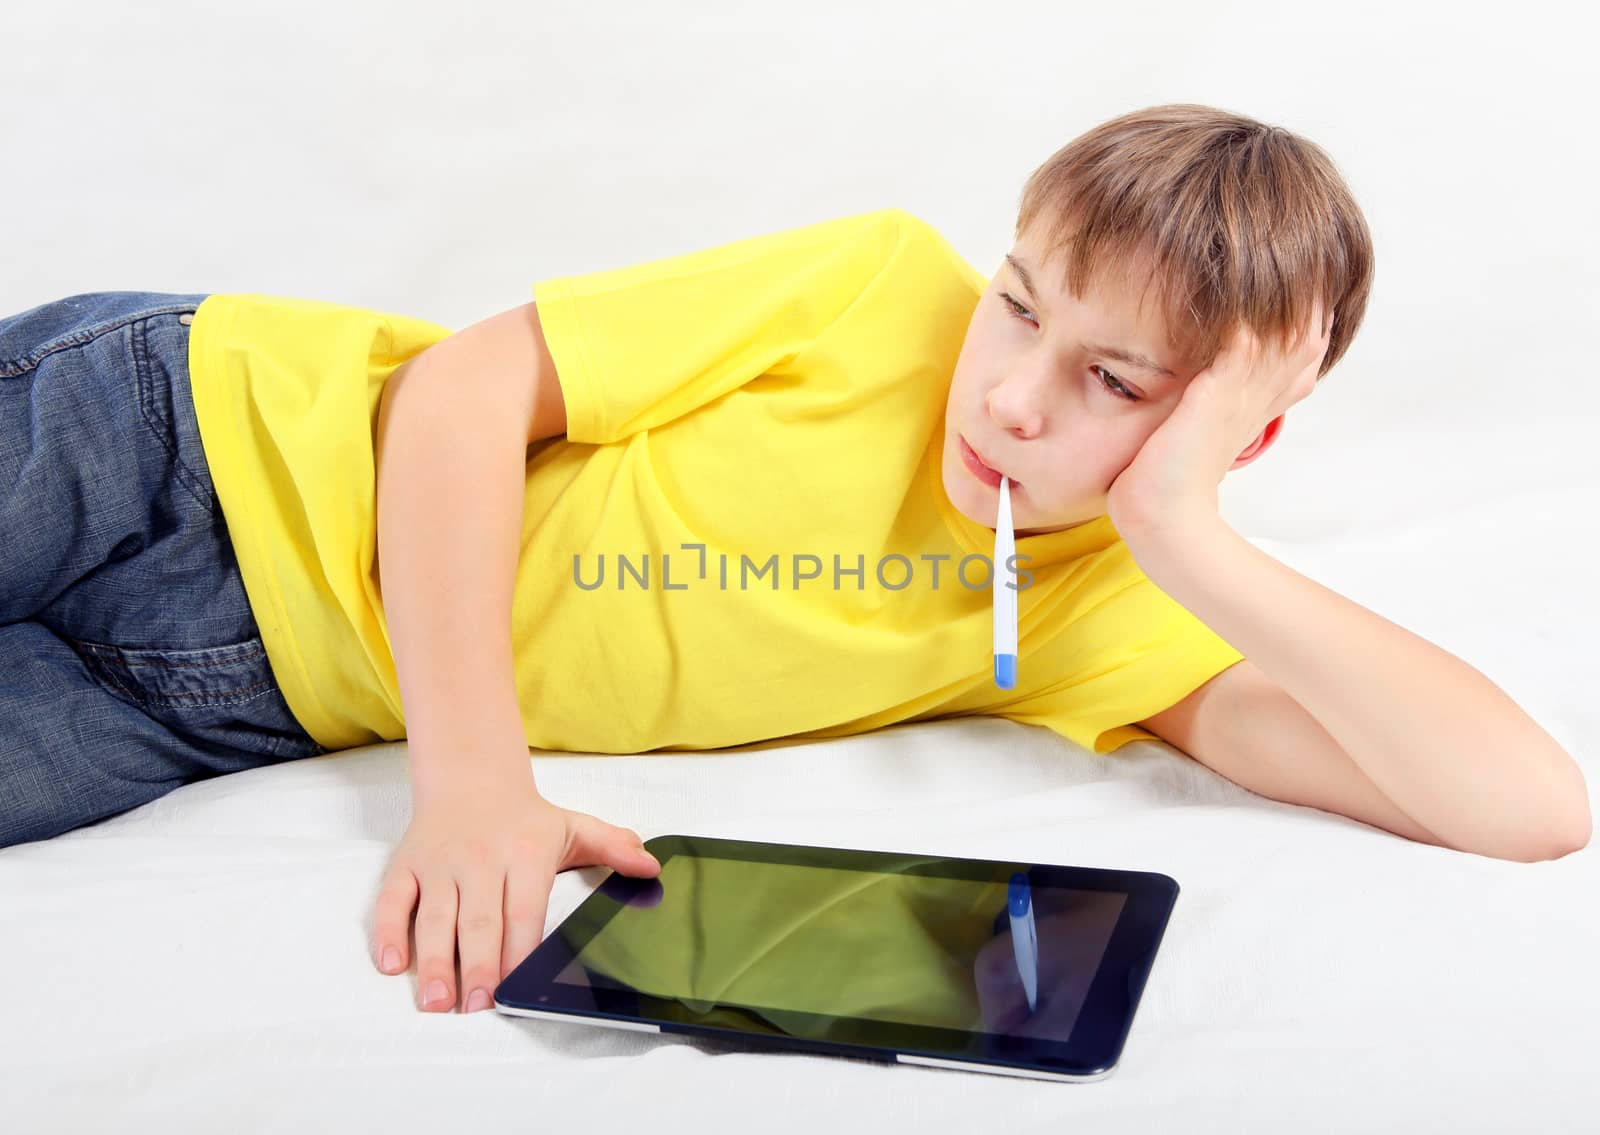 Sick Teenager with Tablet Computer by sabphoto